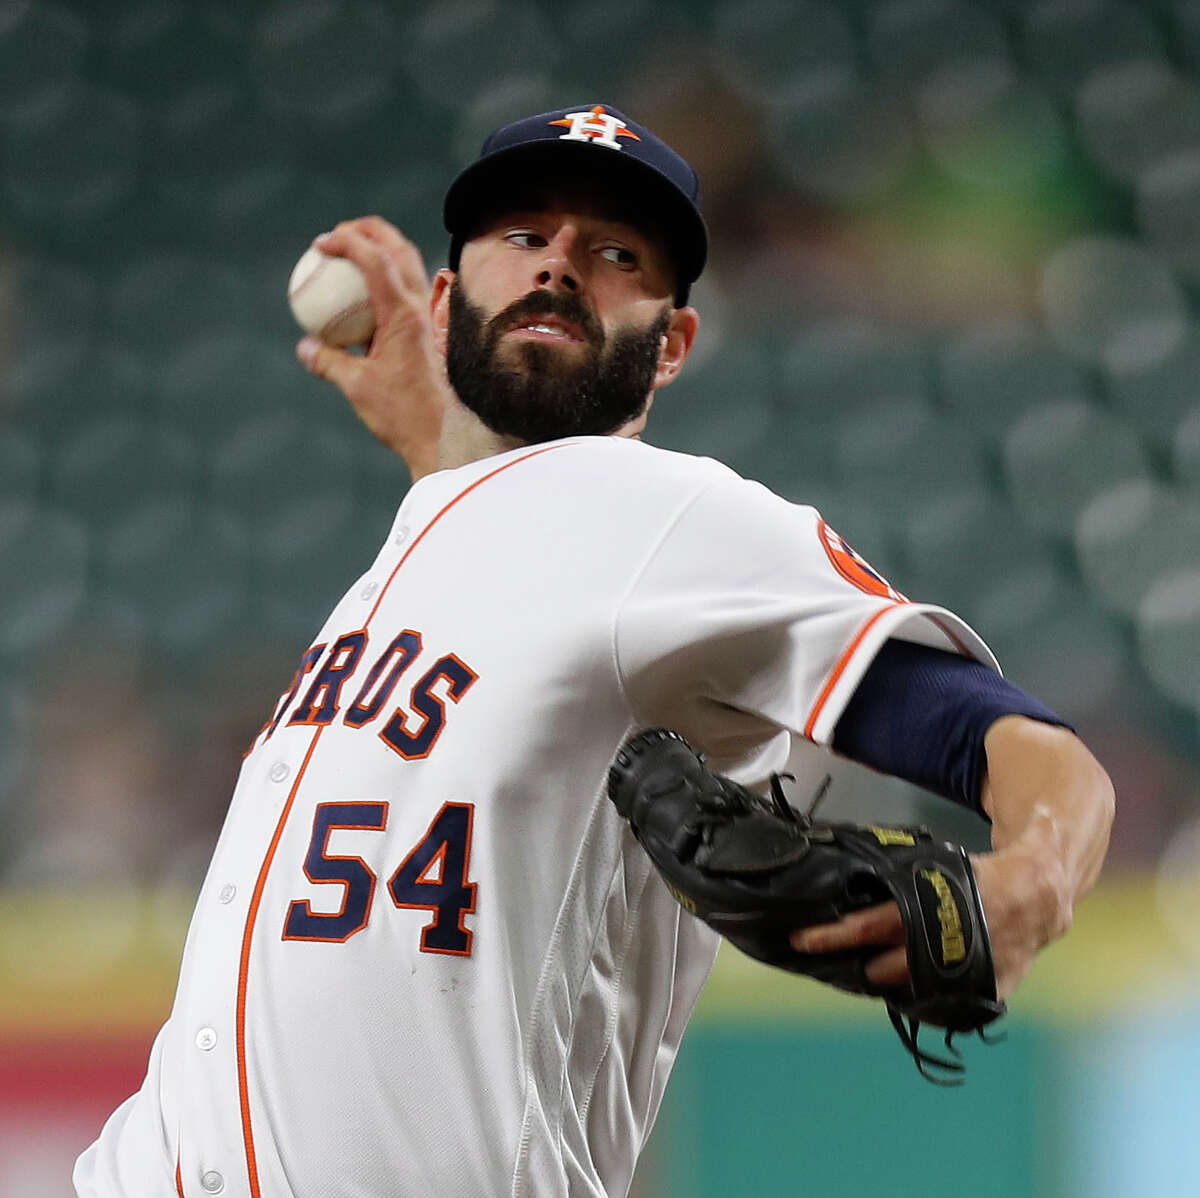 Houston Astros starting pitcher Mike Fiers (54) pitches during the first inning of an MLB game at Minute Maid Park, Thursday, Sept. 22, 2016 in Houston.